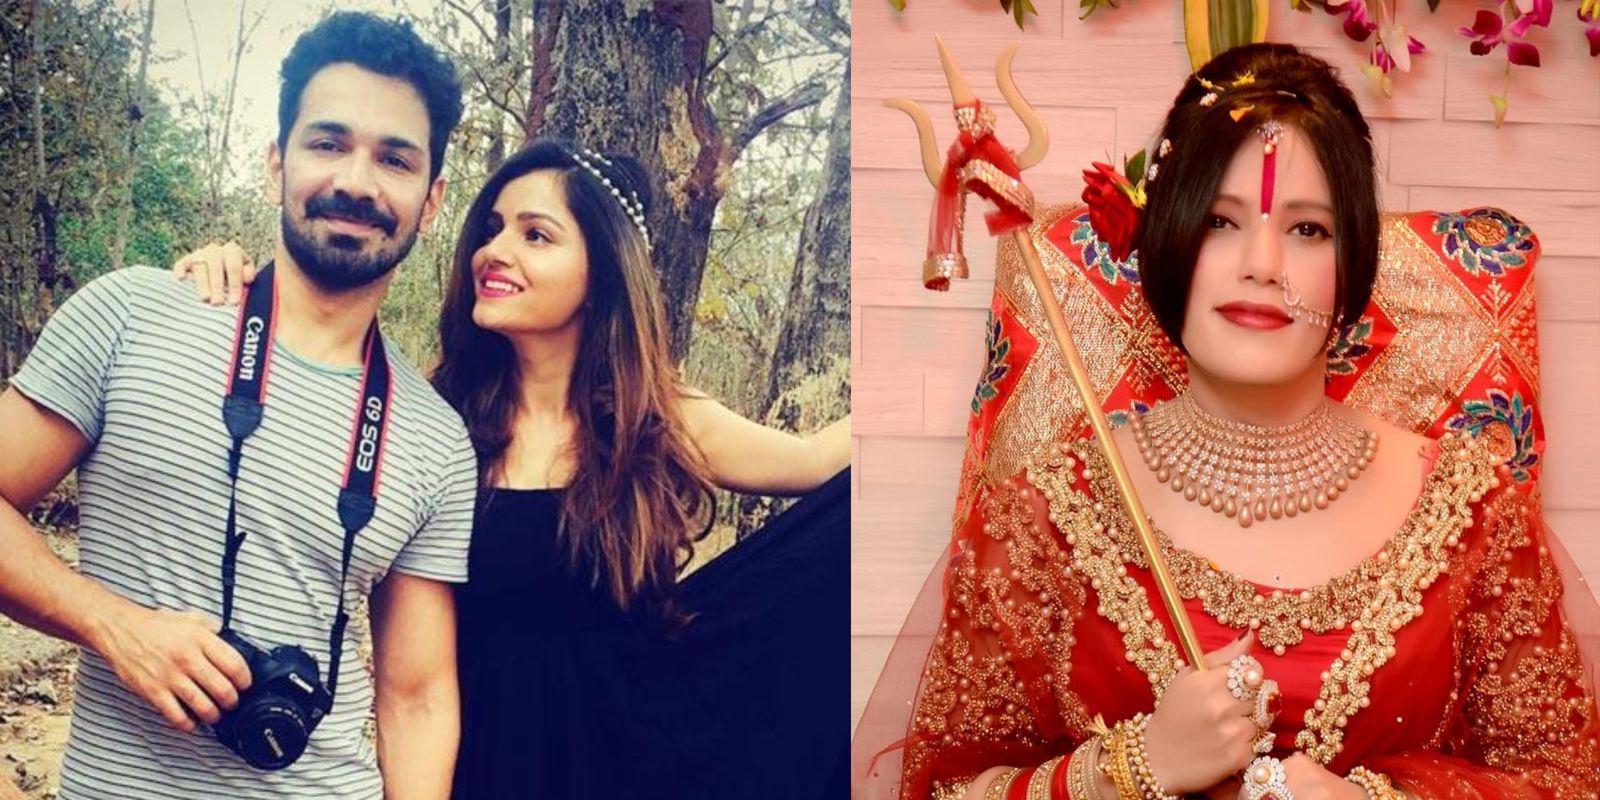 Bigg Boss 14: Rubina-Abhinav’s Pic From Grand Premiere Goes Viral; Radhe Maa Might Stay In The House For Just A Week